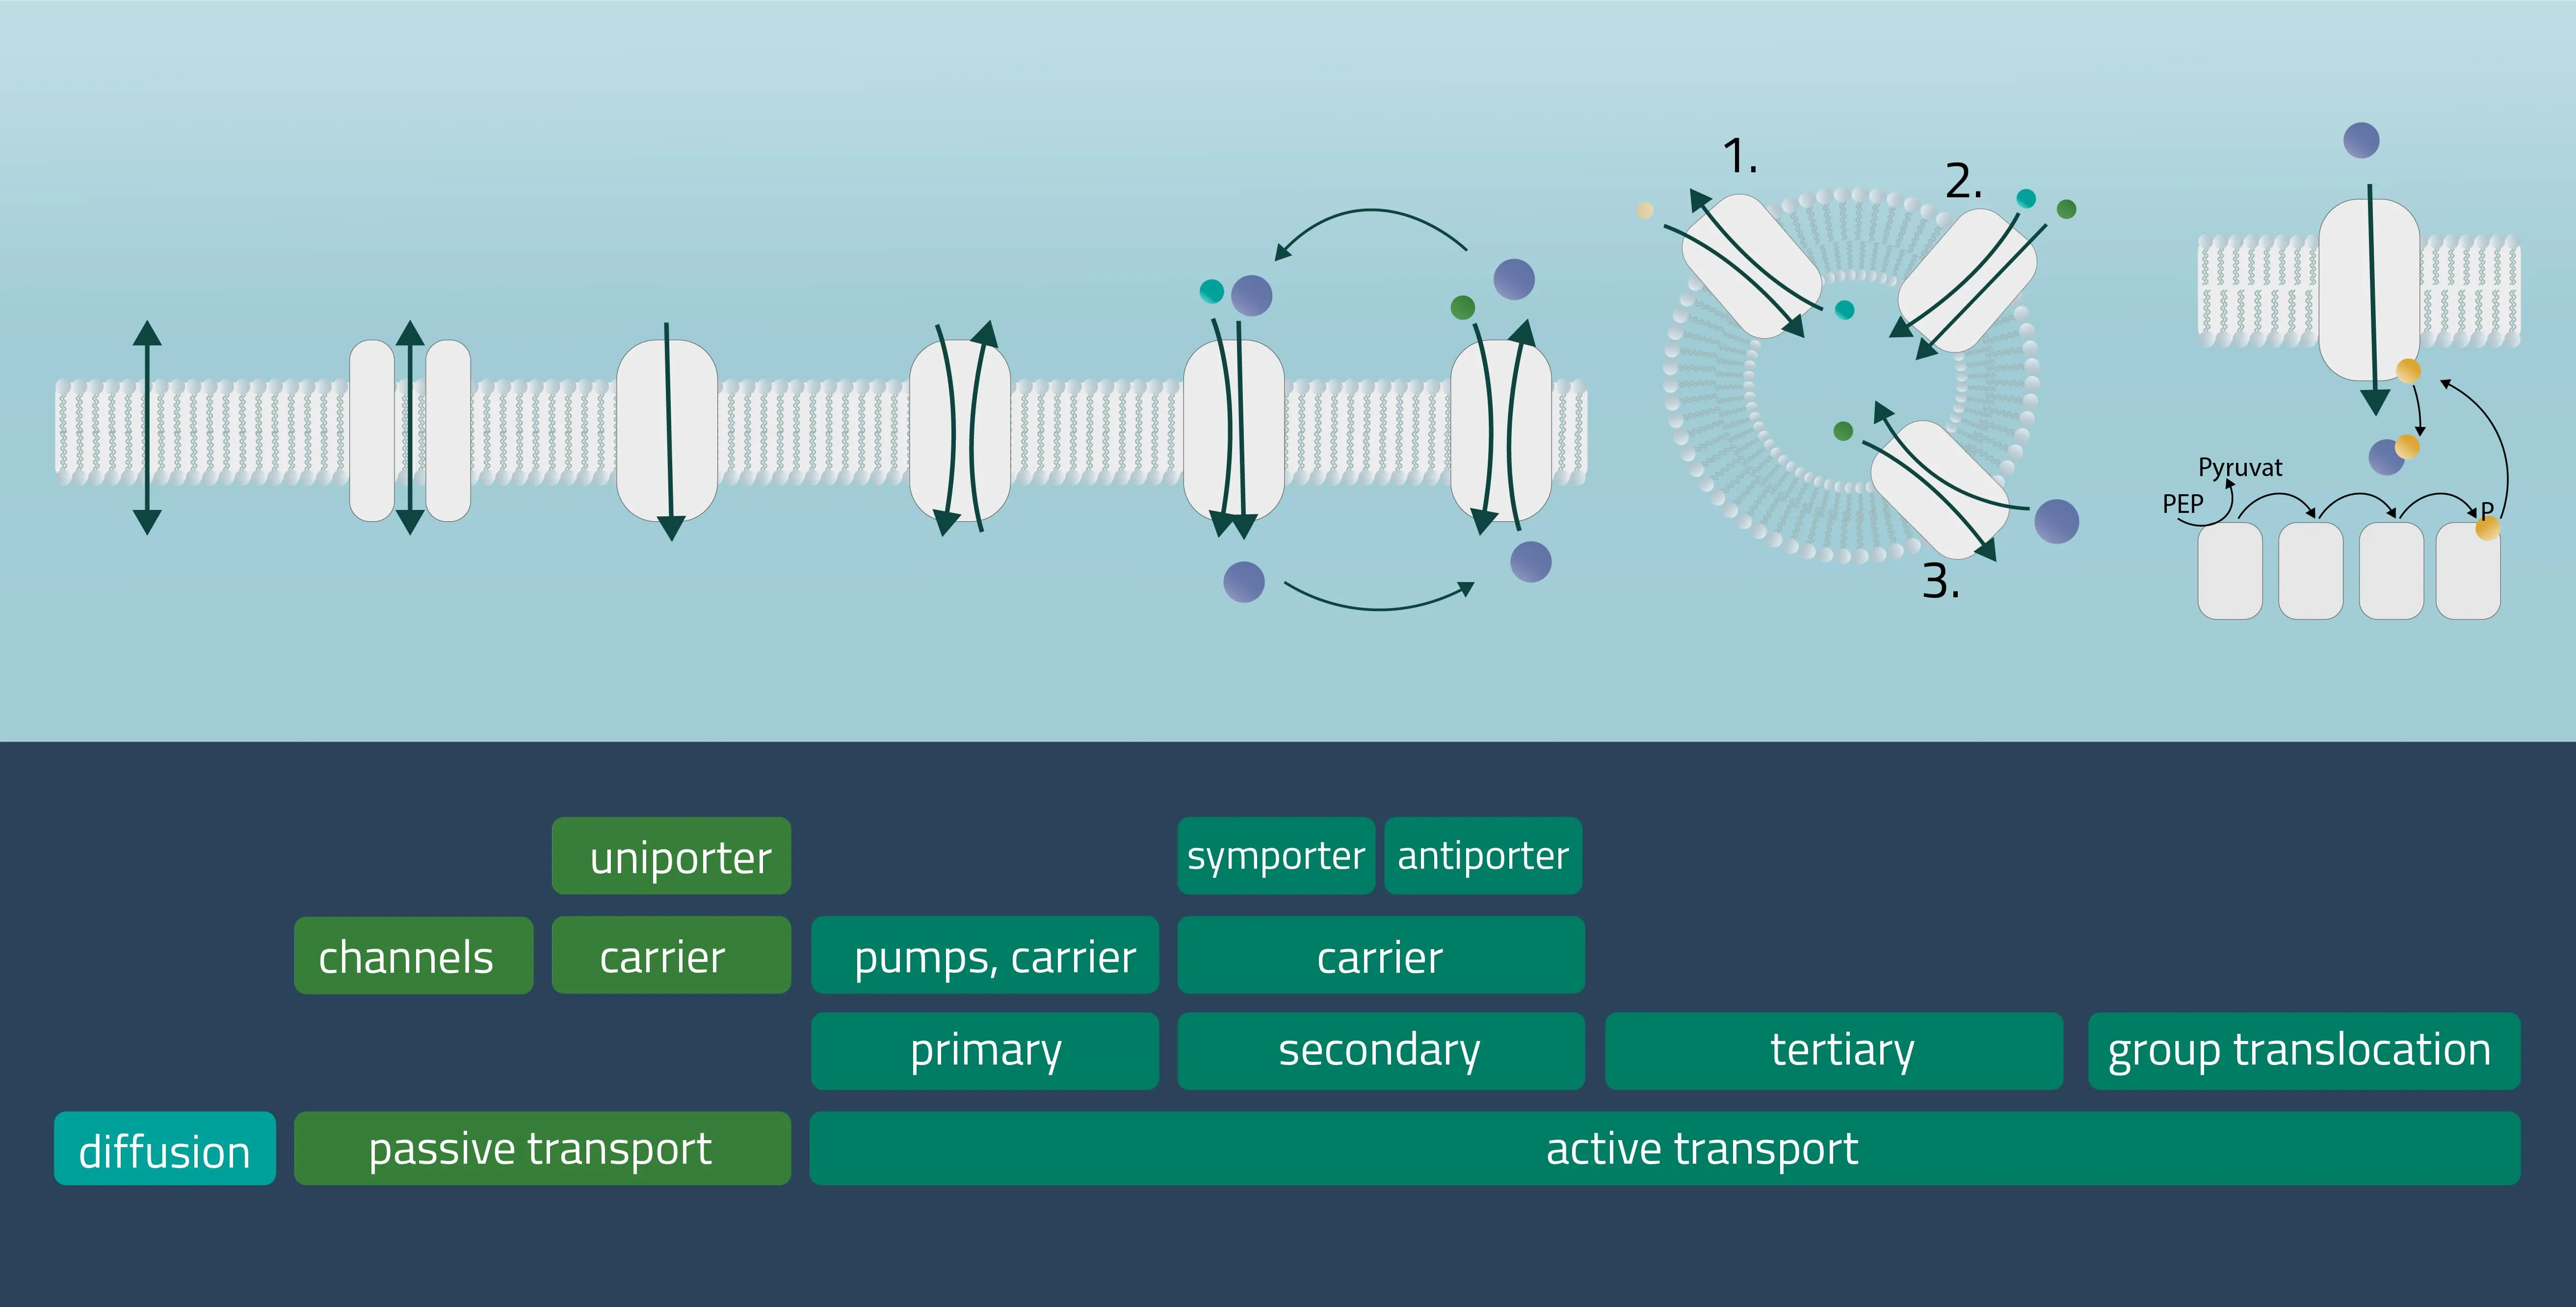 Types of membrane transport processes: Diffusion, Passive or Active